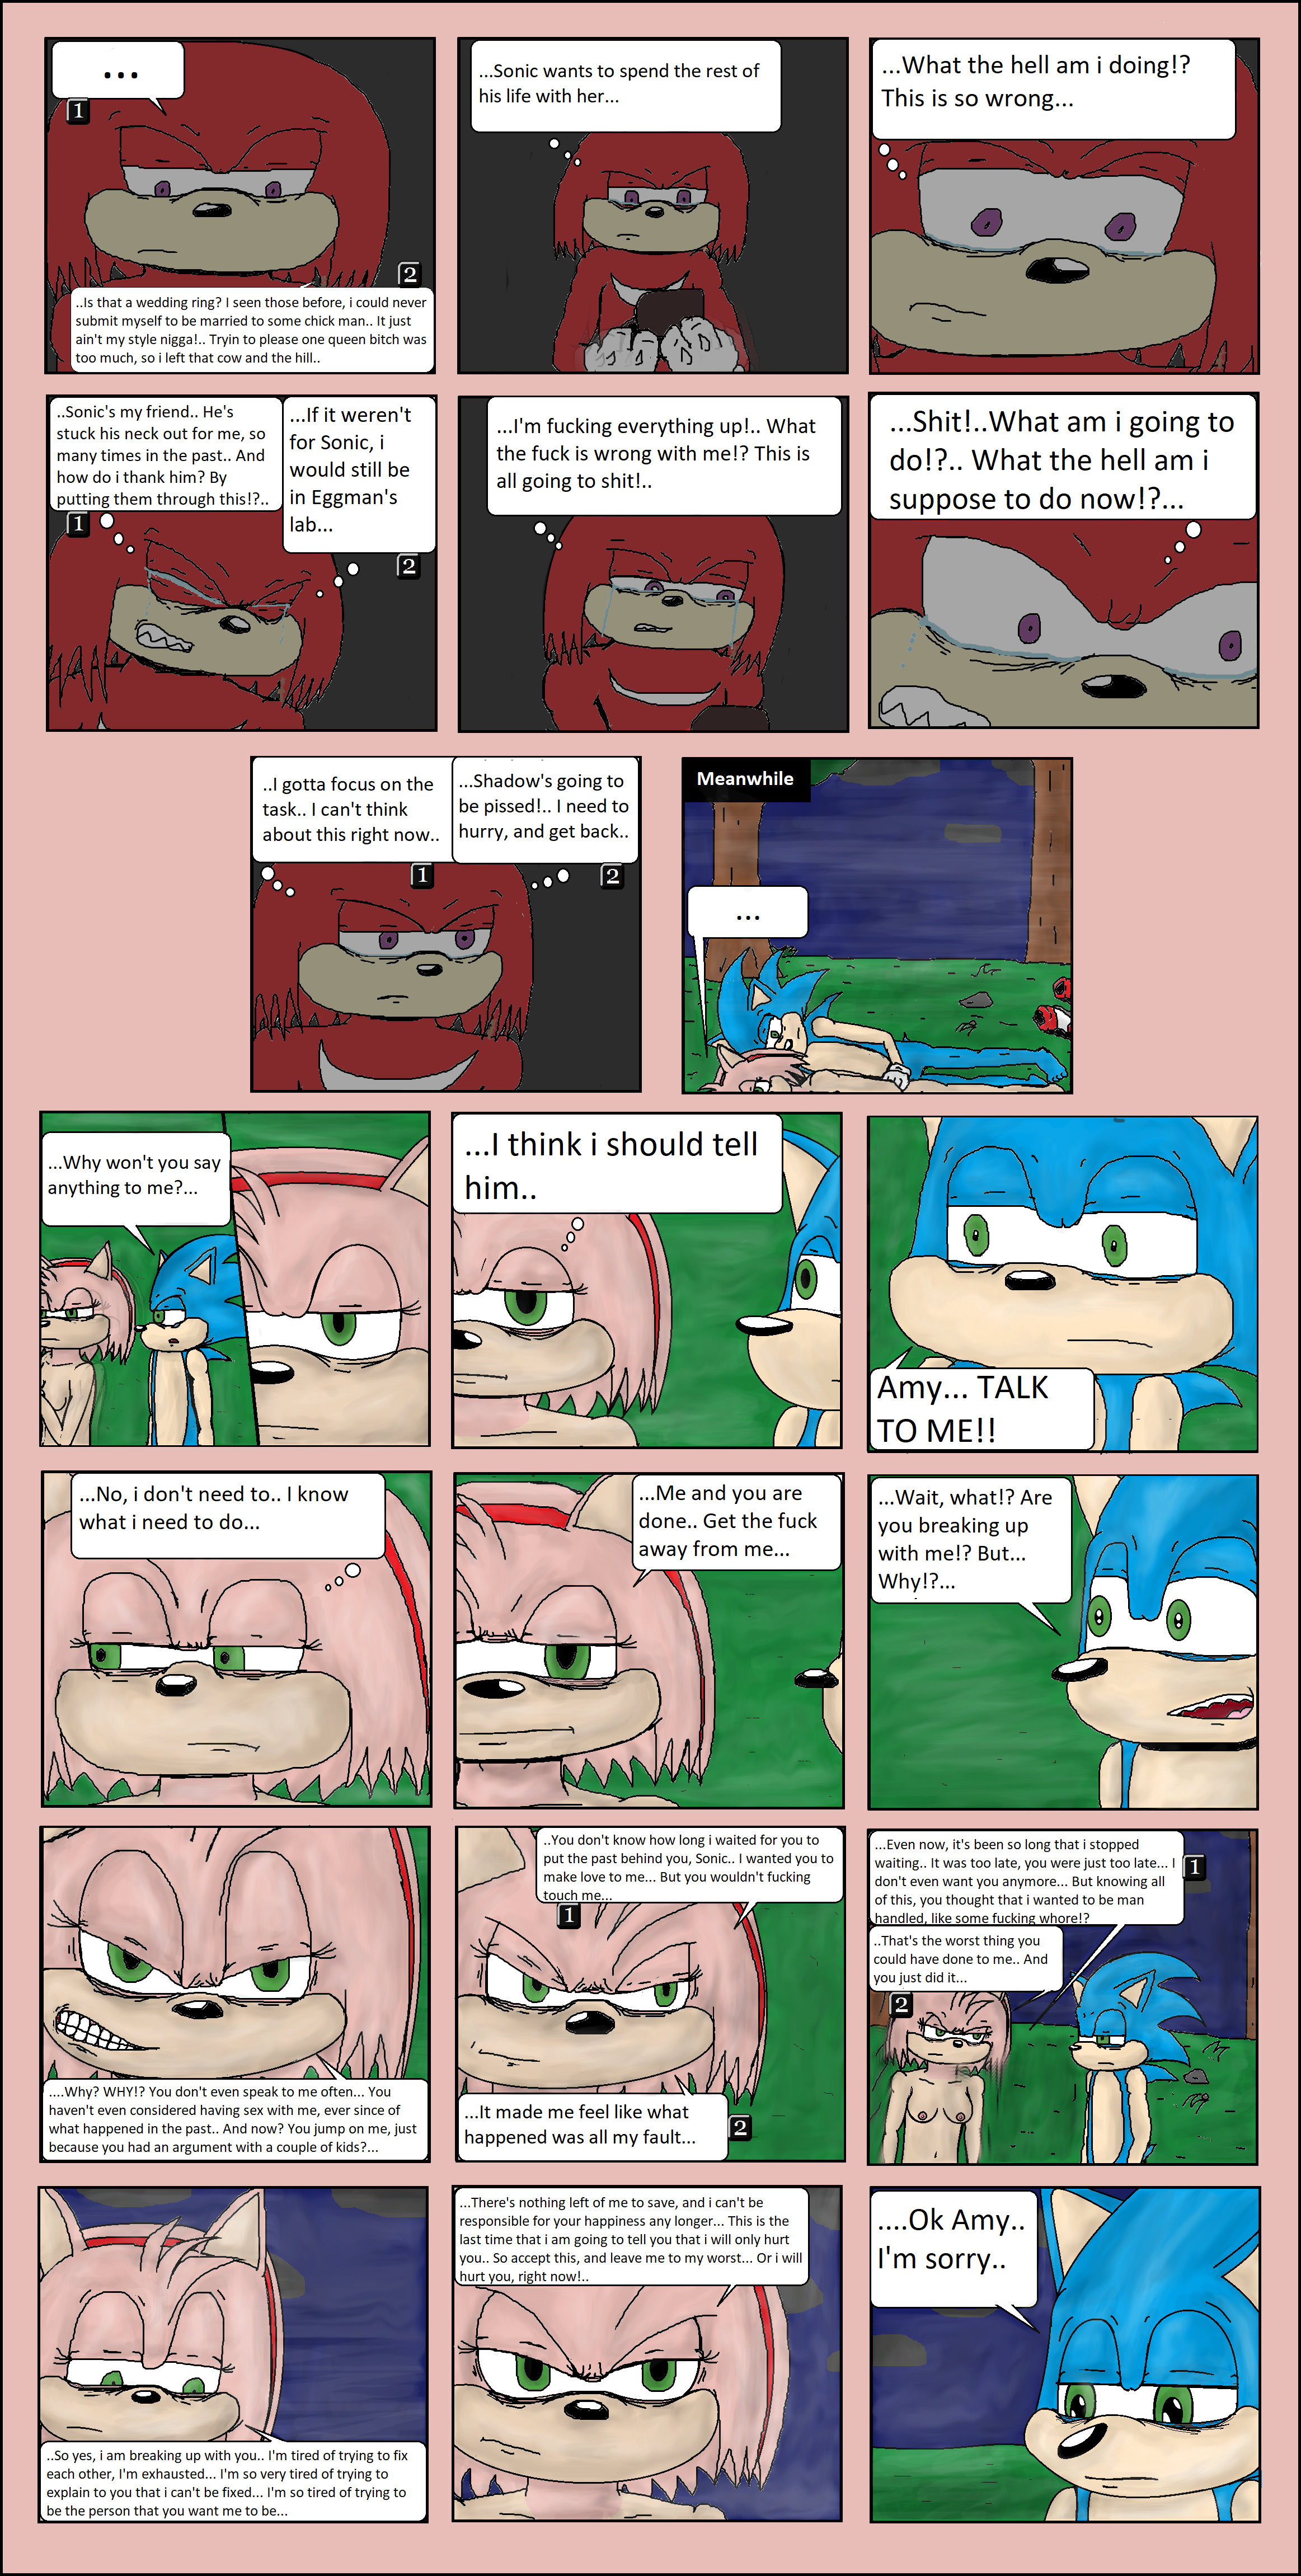 tgtp/pg28.png. If you're seeing this, enable images. Or, perhaps we have a website issue. Try refreshing, if unsuccessful email c@commodorian.org with a detailed description of how you got here.